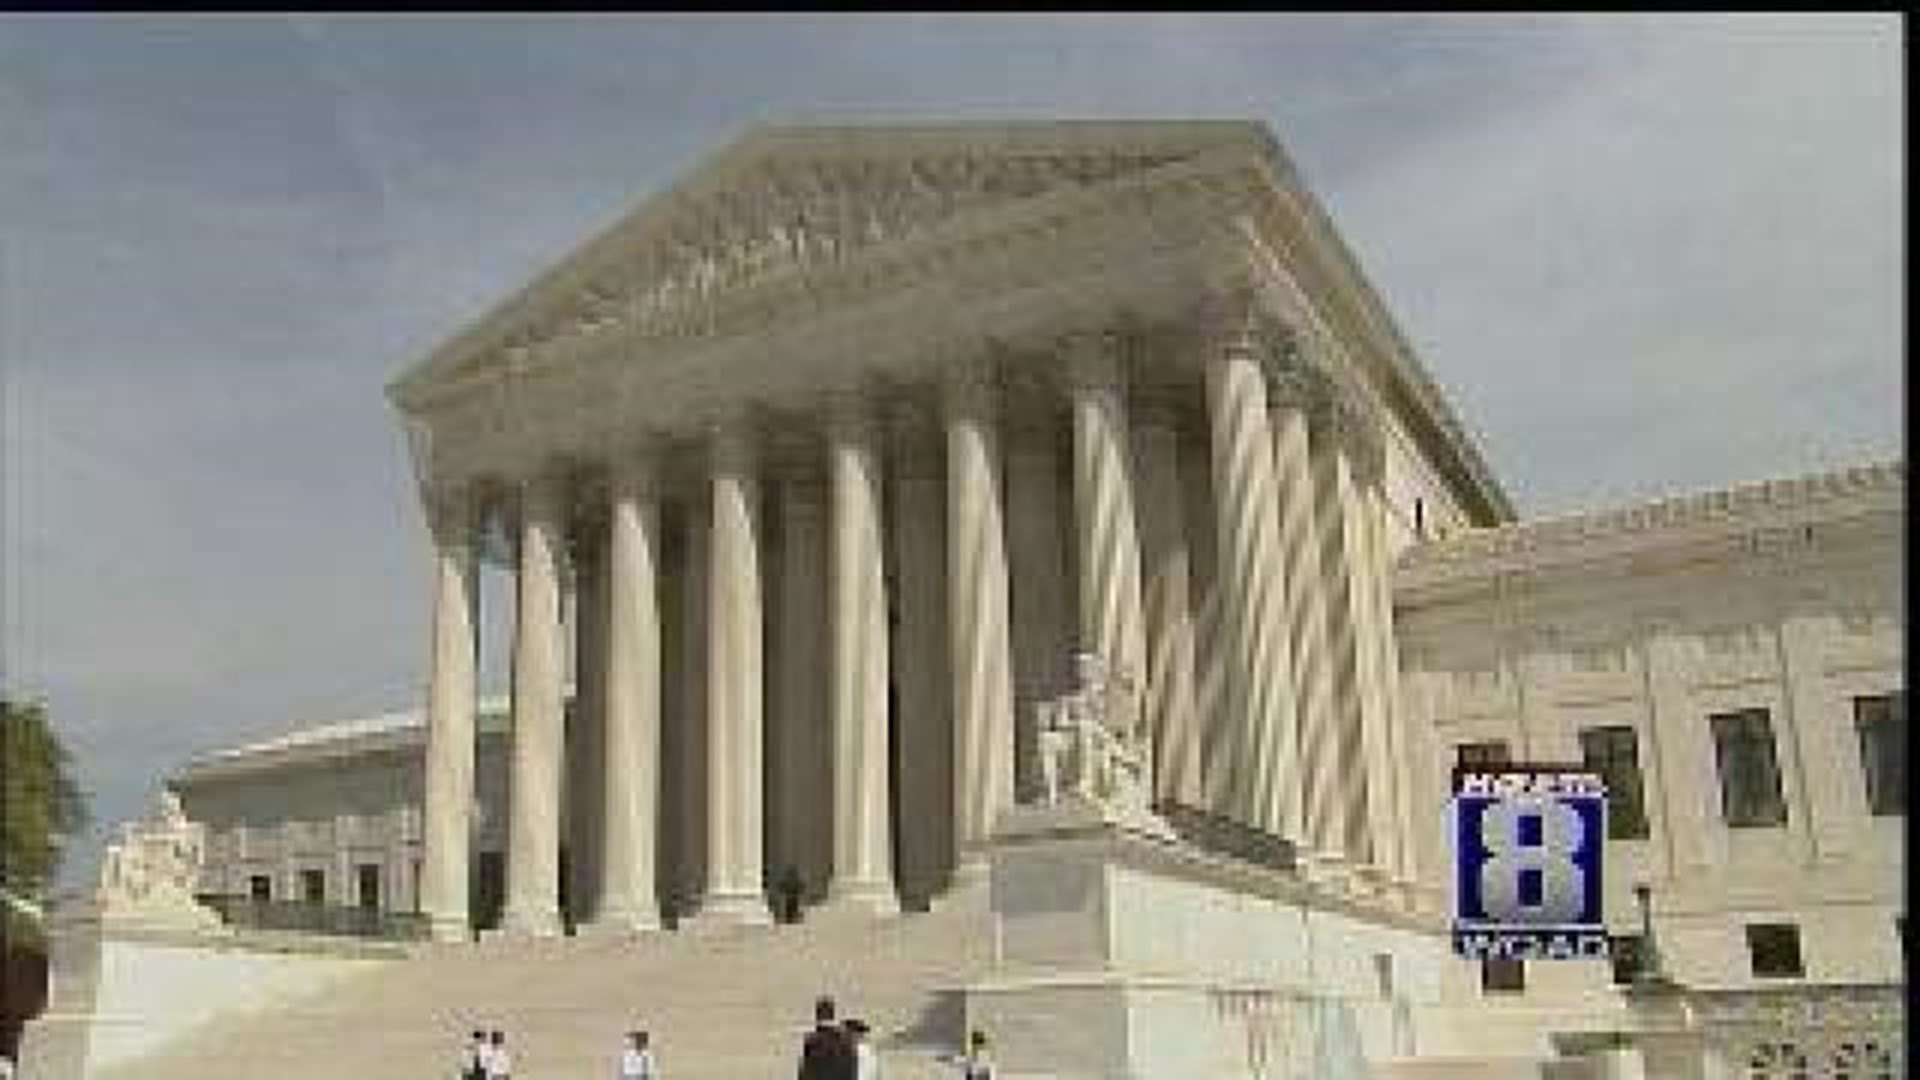 Day 3 of oral arguments on The Affordable Care Act